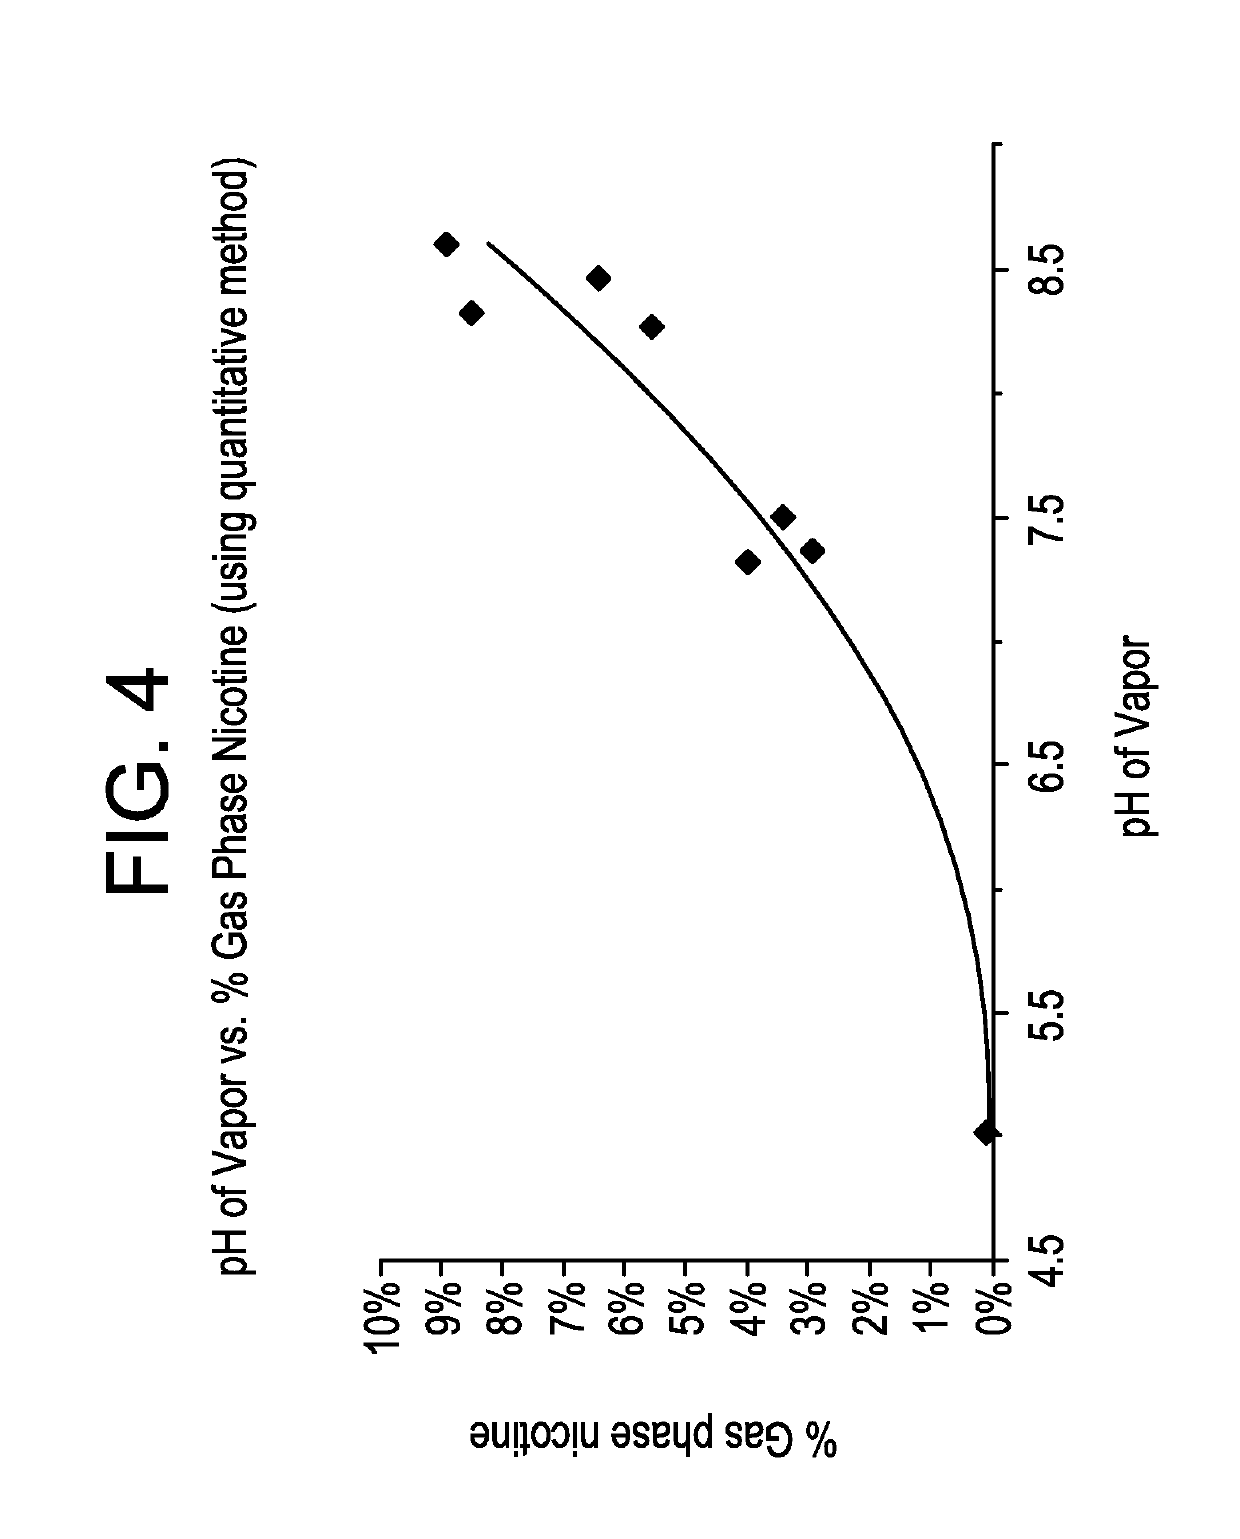 Pre-vaporization formulation for controlling acidity in an e-vaping device